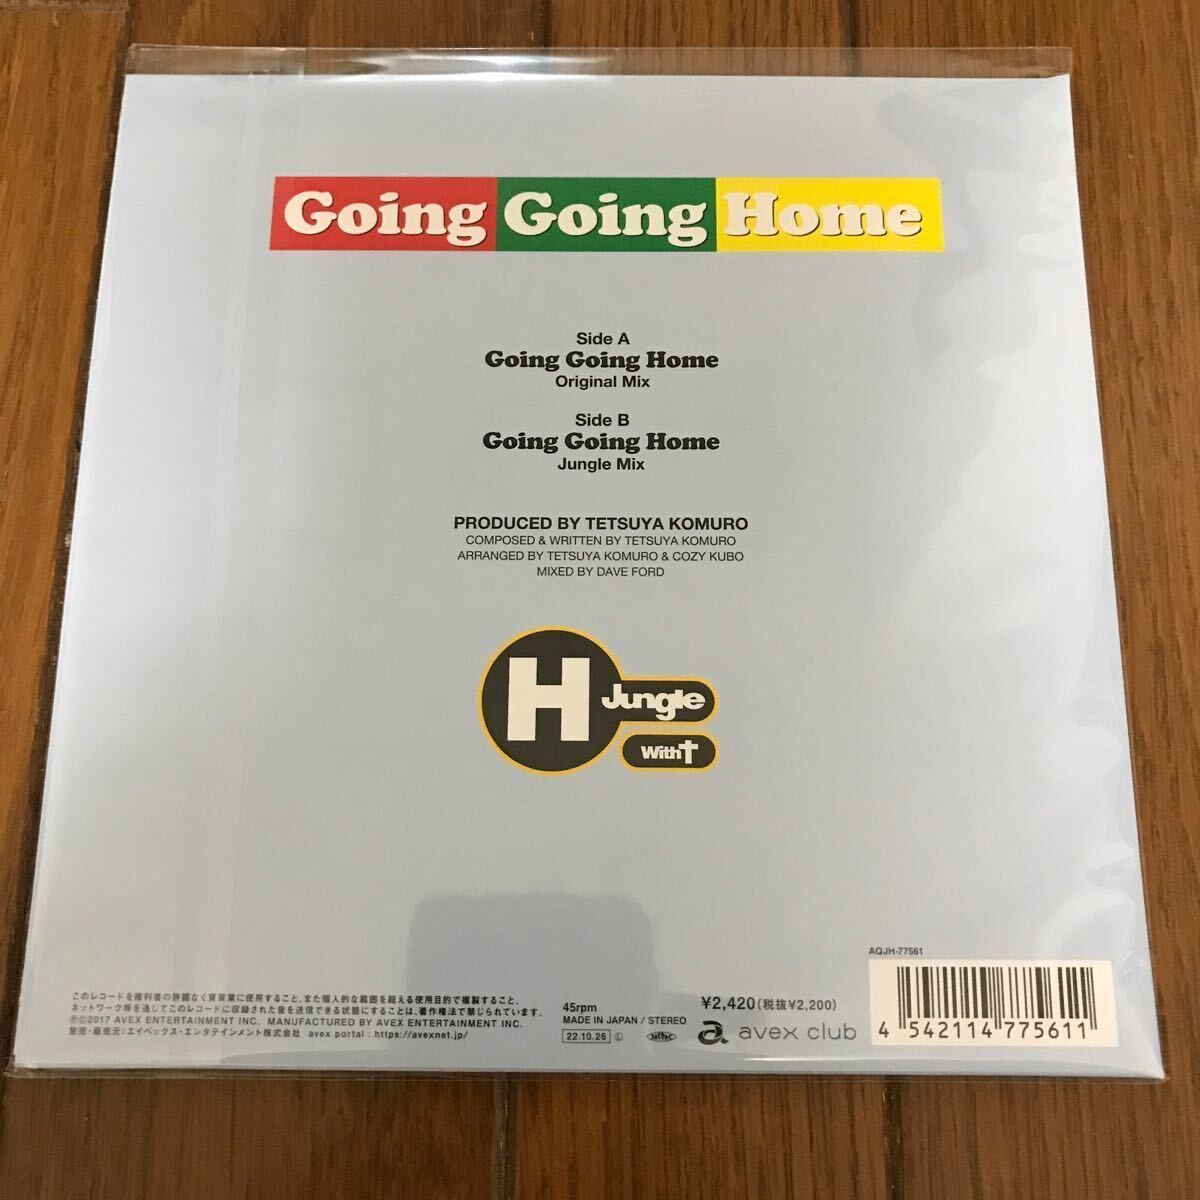 H Jungle With t レコード アナログ盤 3枚セット WOW WAR TONIGHT / GOING GOING HOME / FRIENDSHIP / 新品未開封の画像5